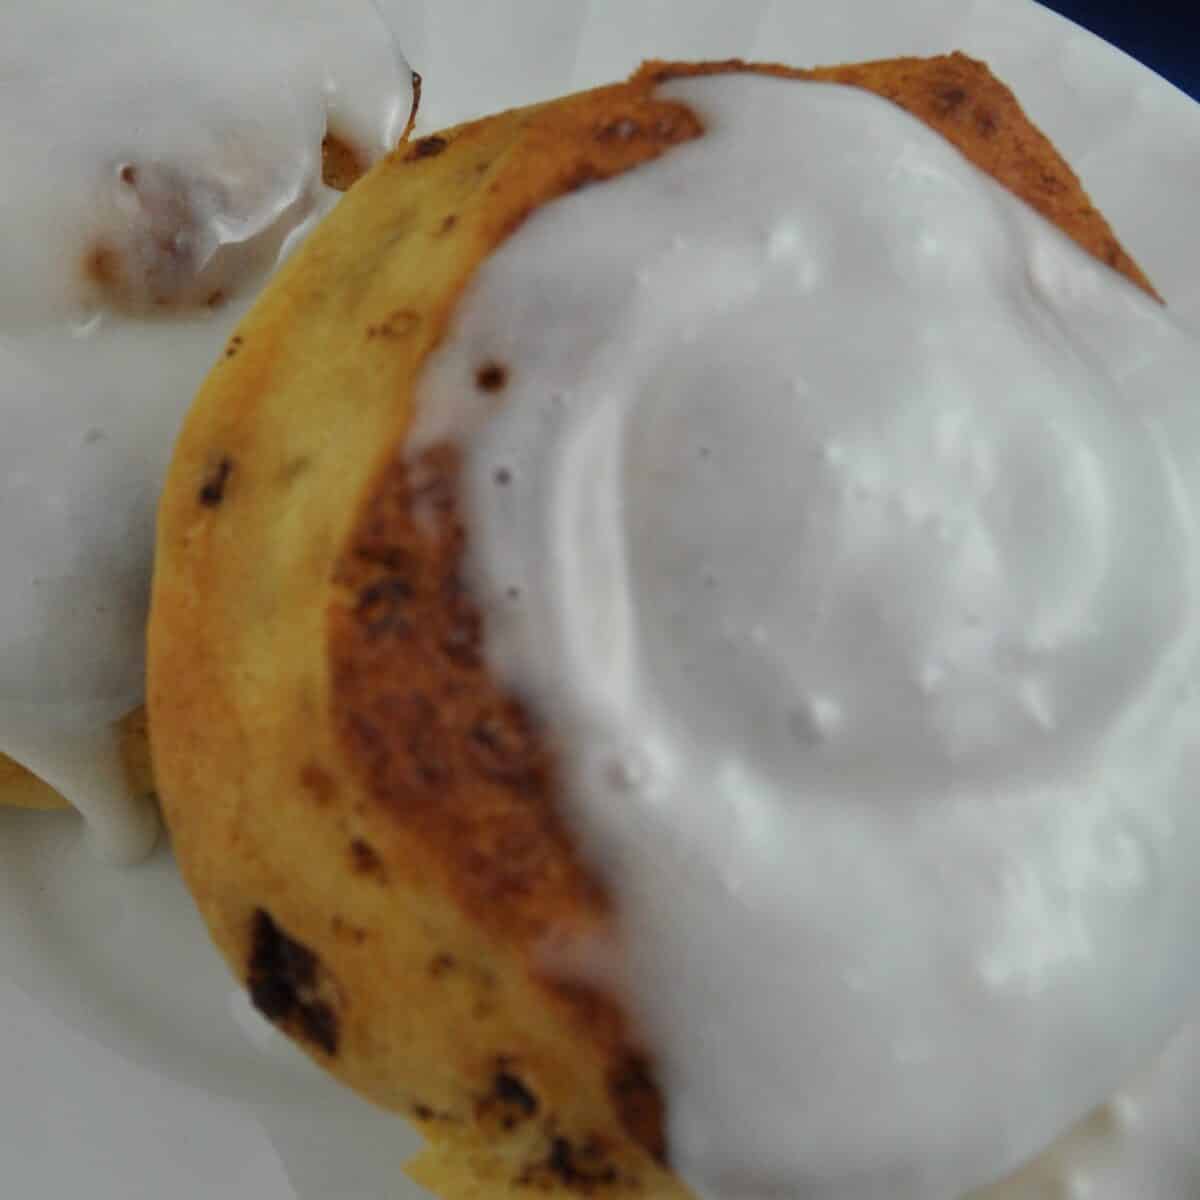 Cinnamon rolls in air fryer with sweet icing running down the side.